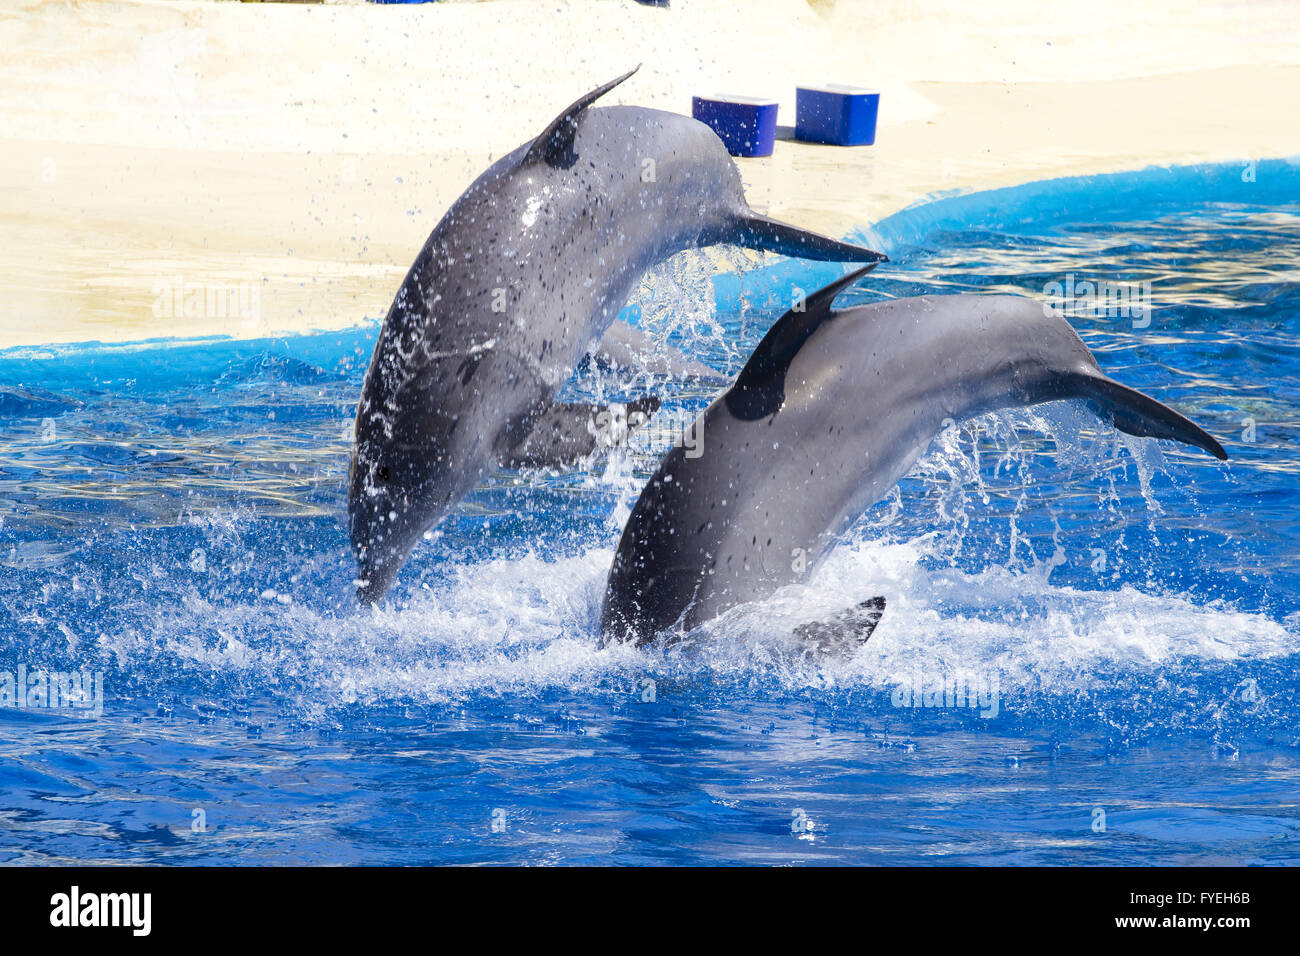 dolphin jump out of the water in pool Stock Photo